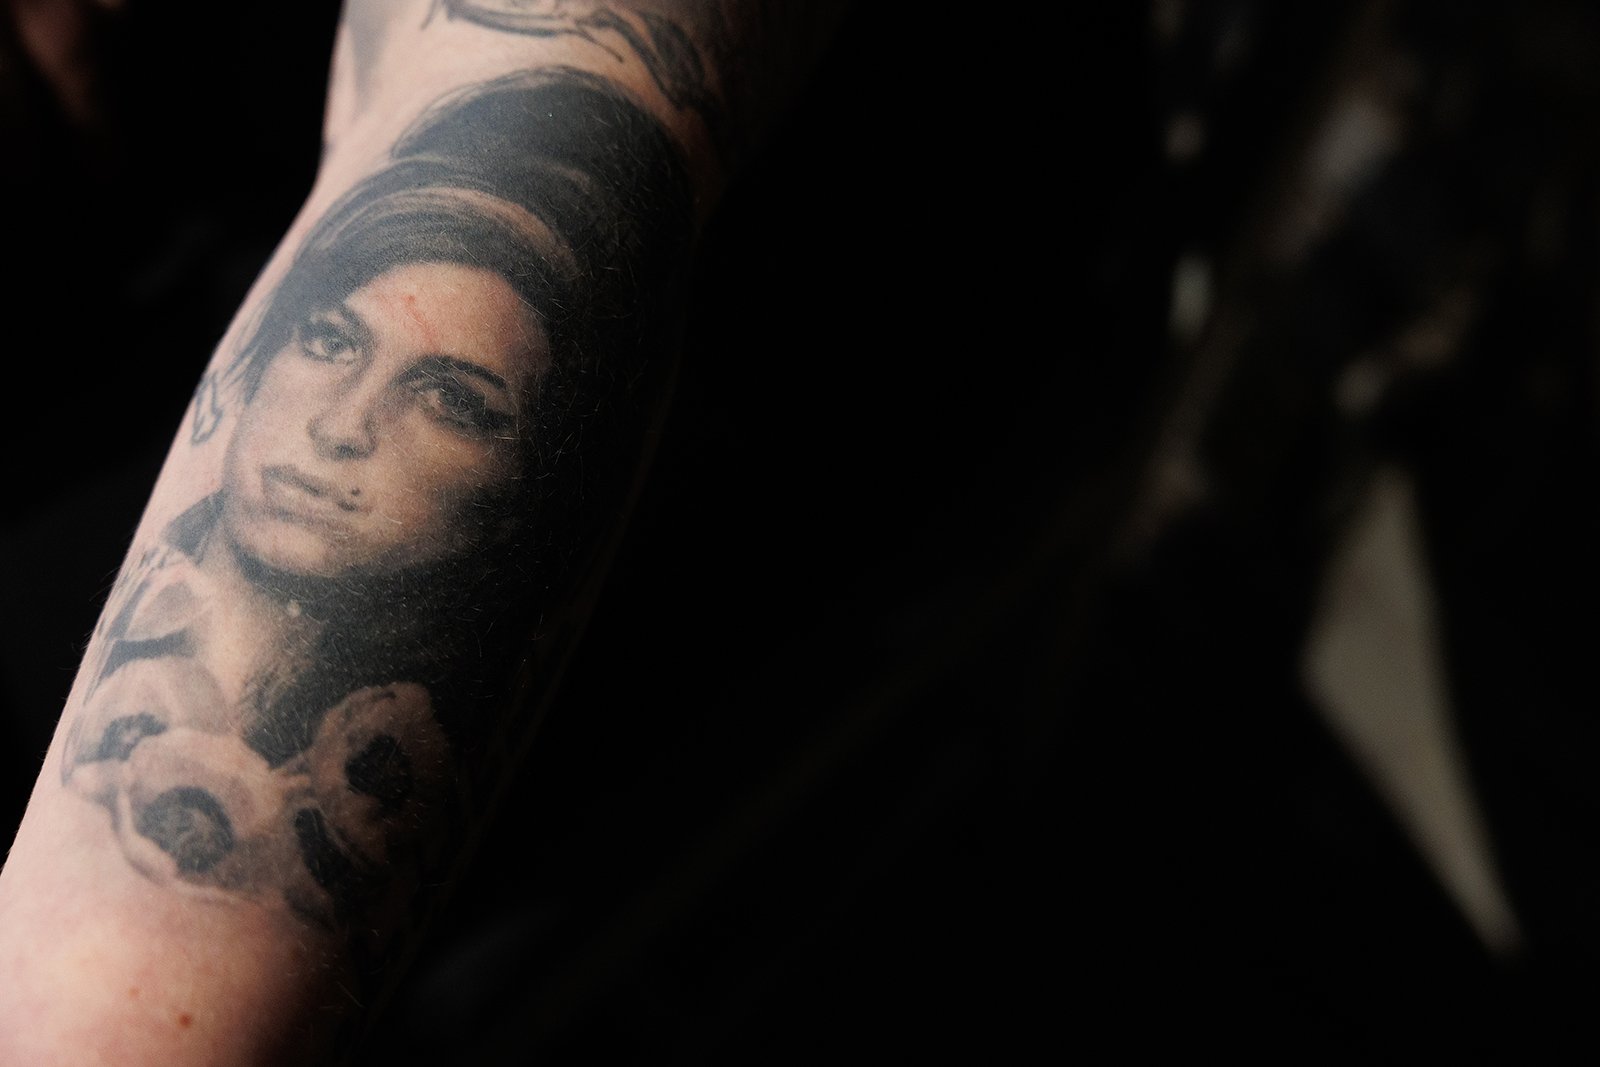  Sally Gibbens shows her tattoo of singer Amy Winehouse, who died of “alcohol toxicity.” Credit: GILES CLASEN 